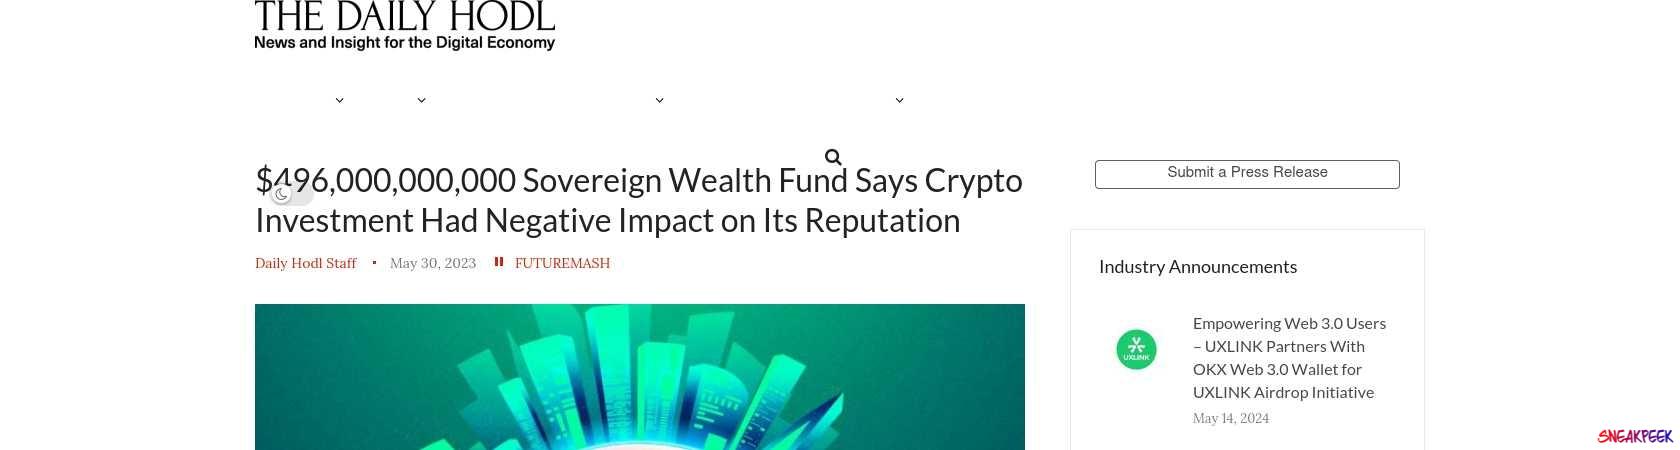 Read the full Article:  ⭲ $496,000,000,000 Sovereign Wealth Fund Says Crypto Investment Had Negative Impact on Its Reputation